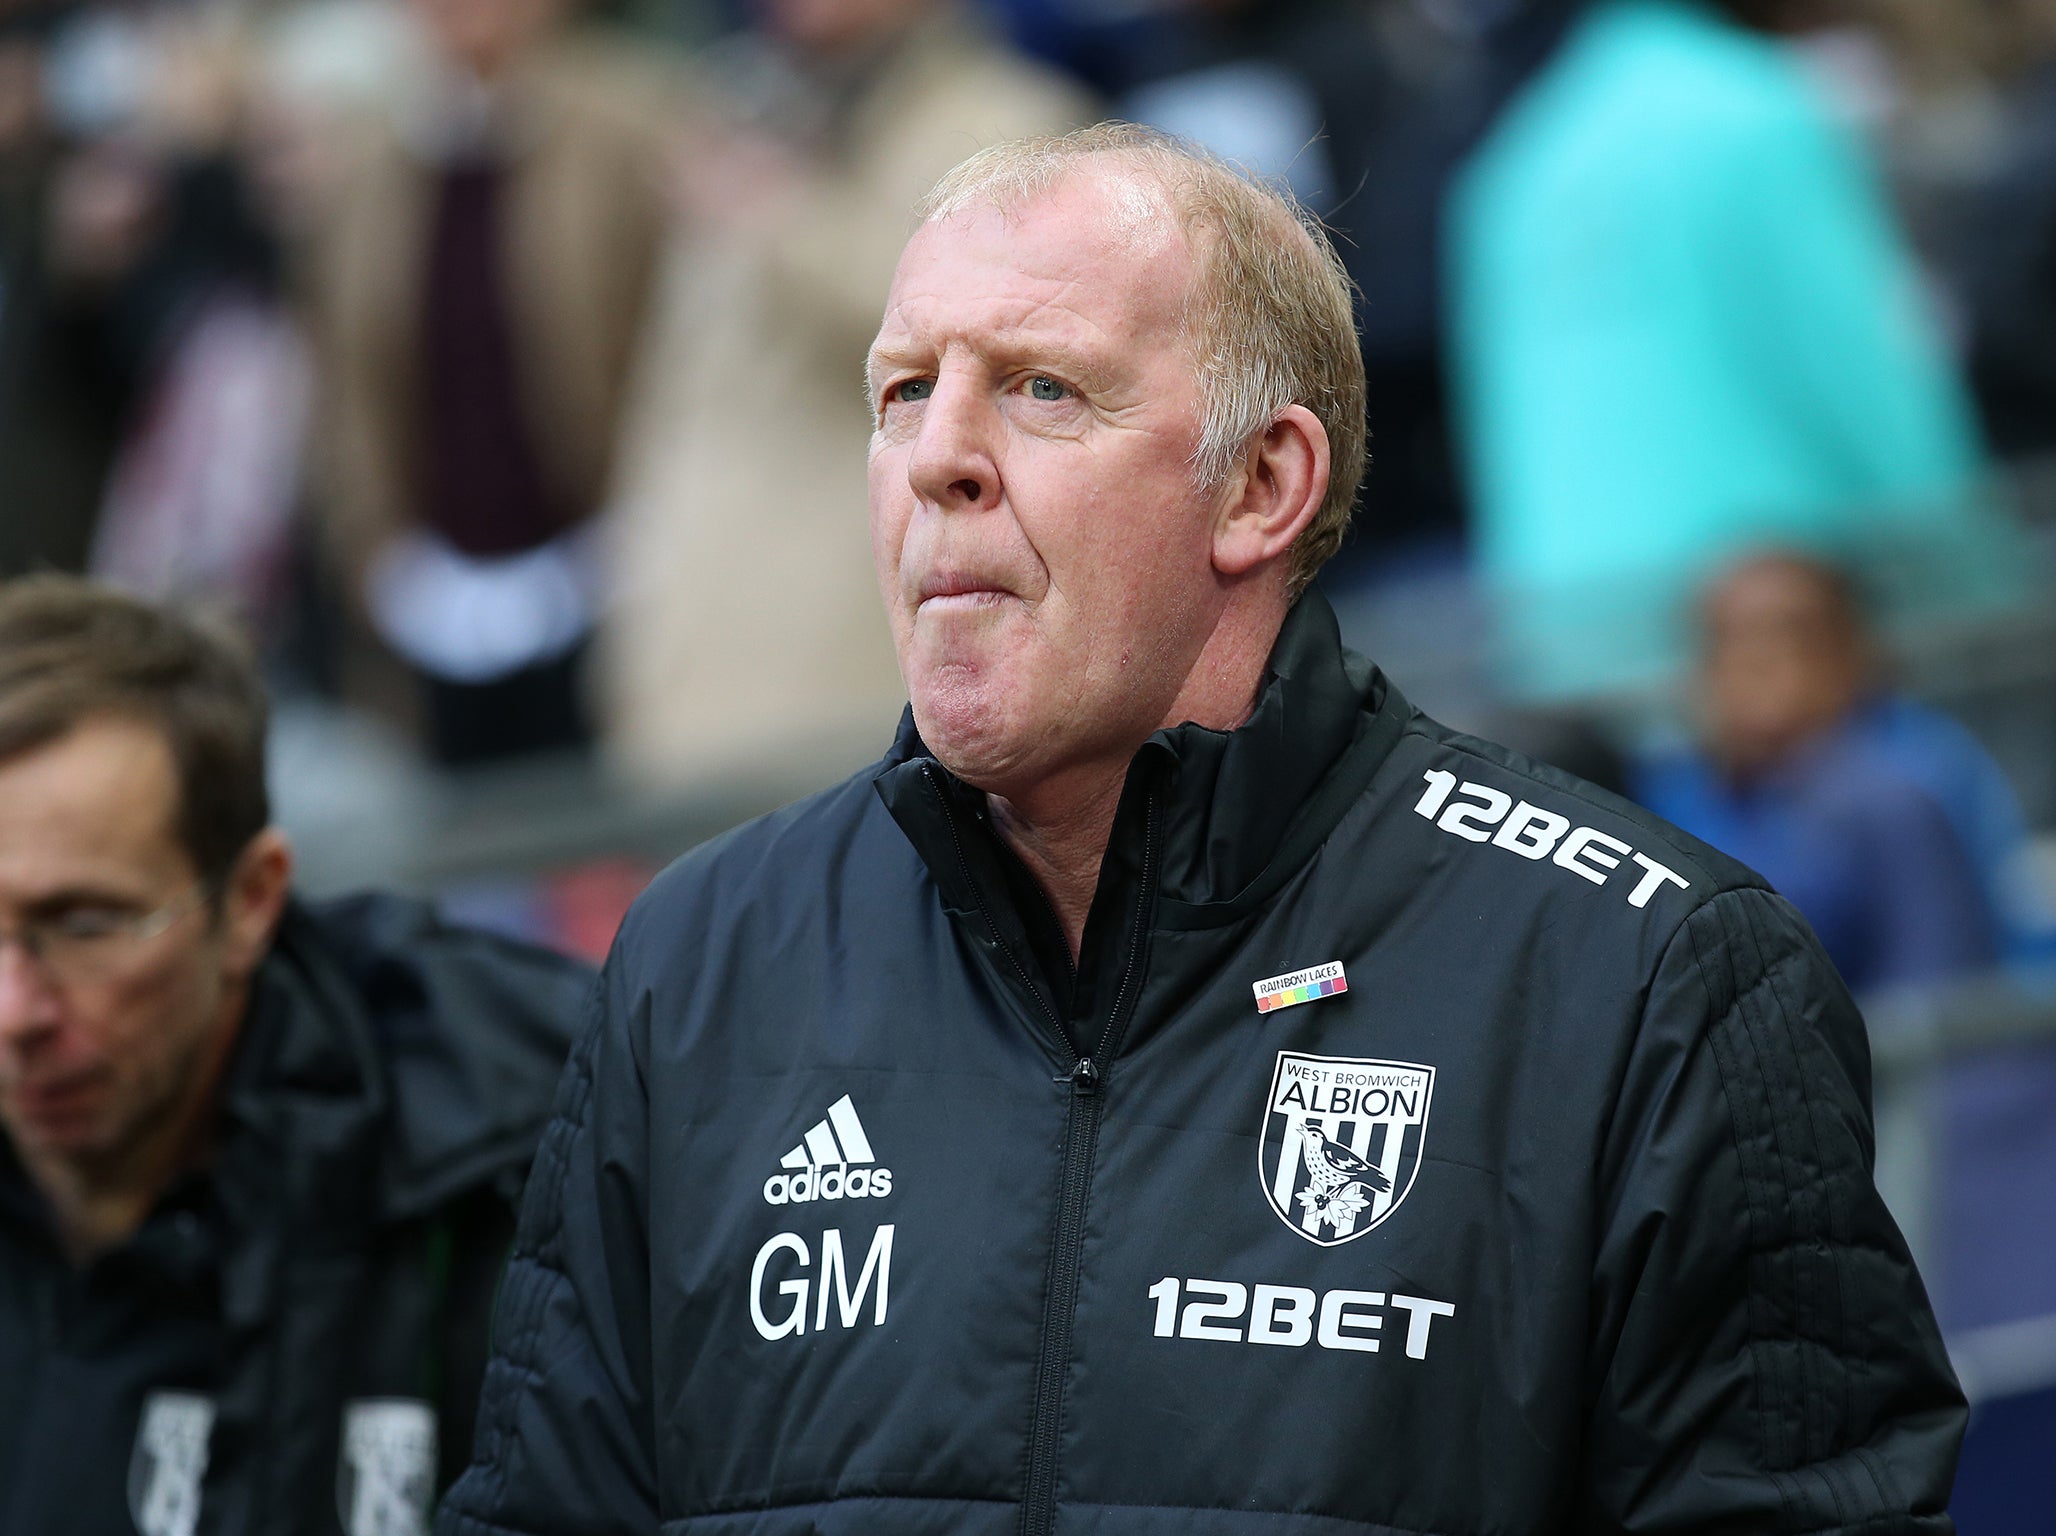 Megson has stopped short of saying he wants the job full-time